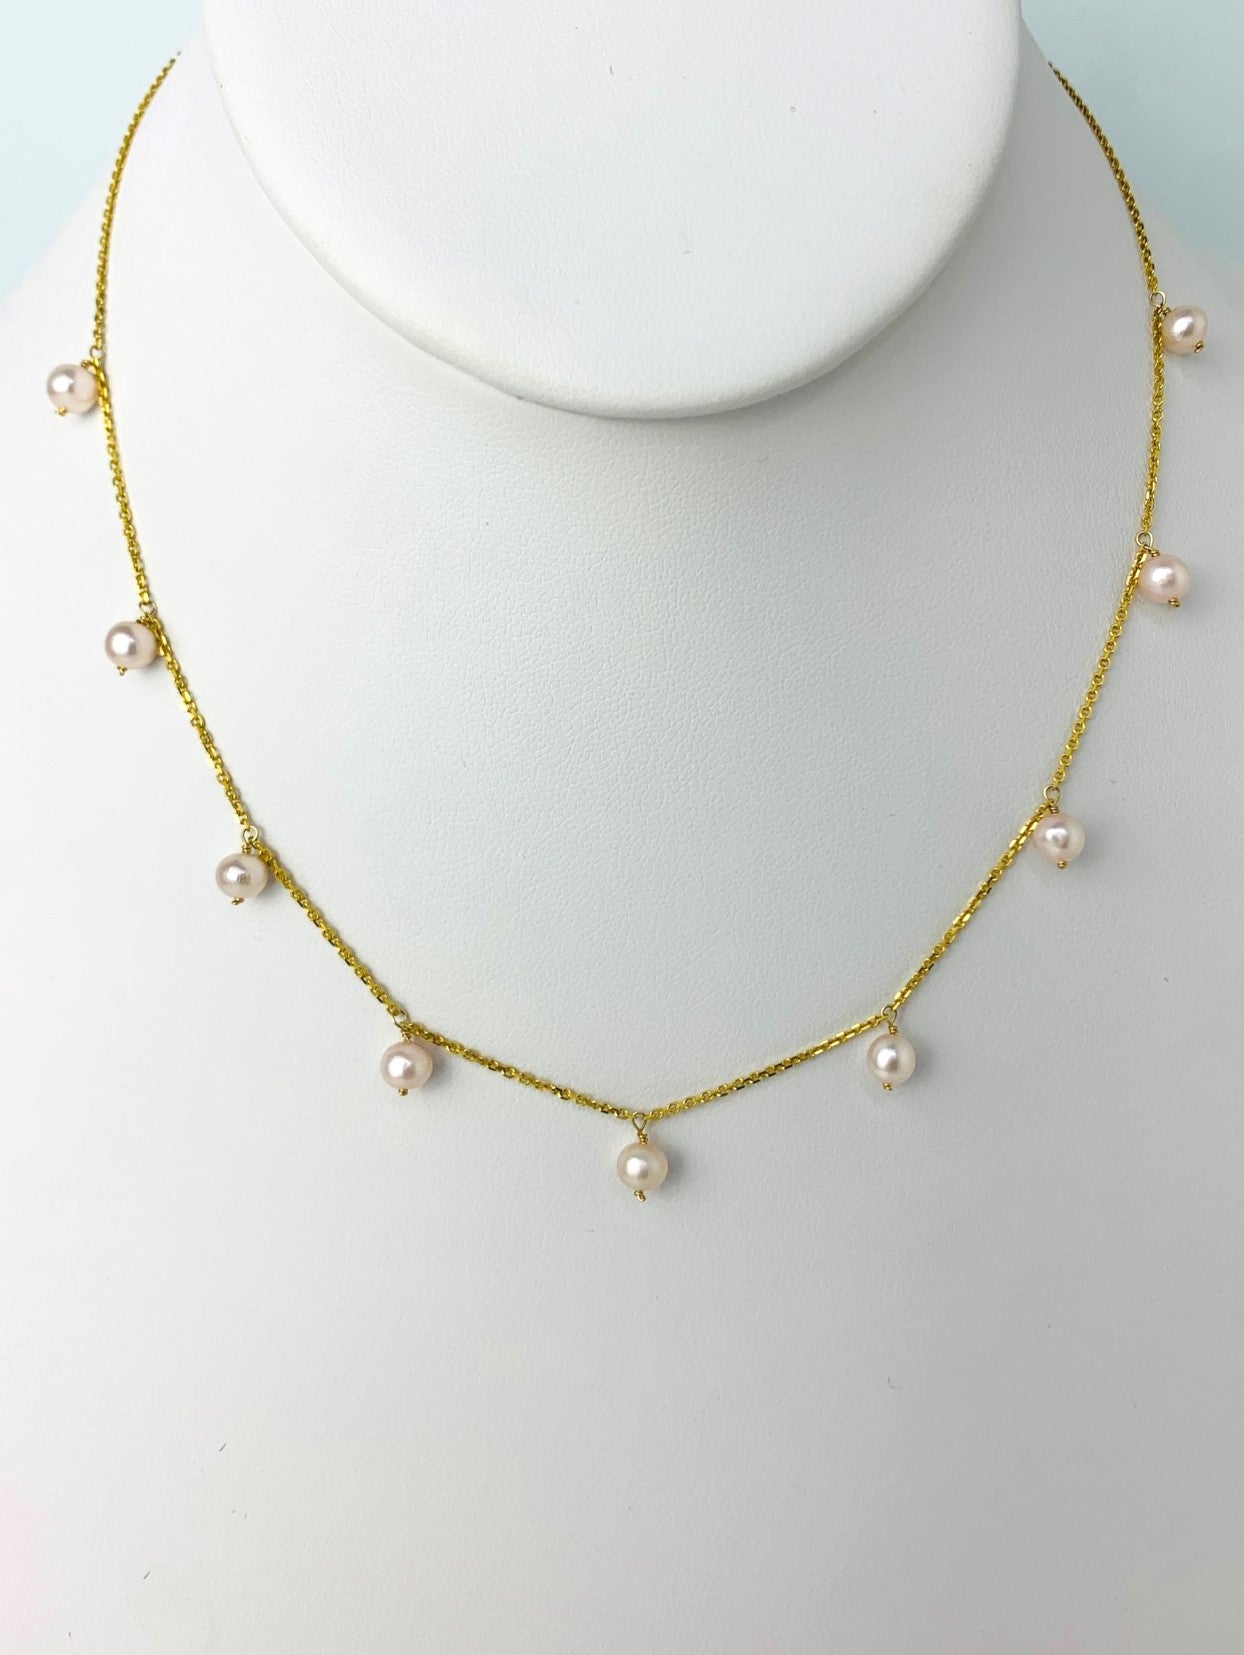 pink freshwater pearls dangling in stations on a yellow gold chain